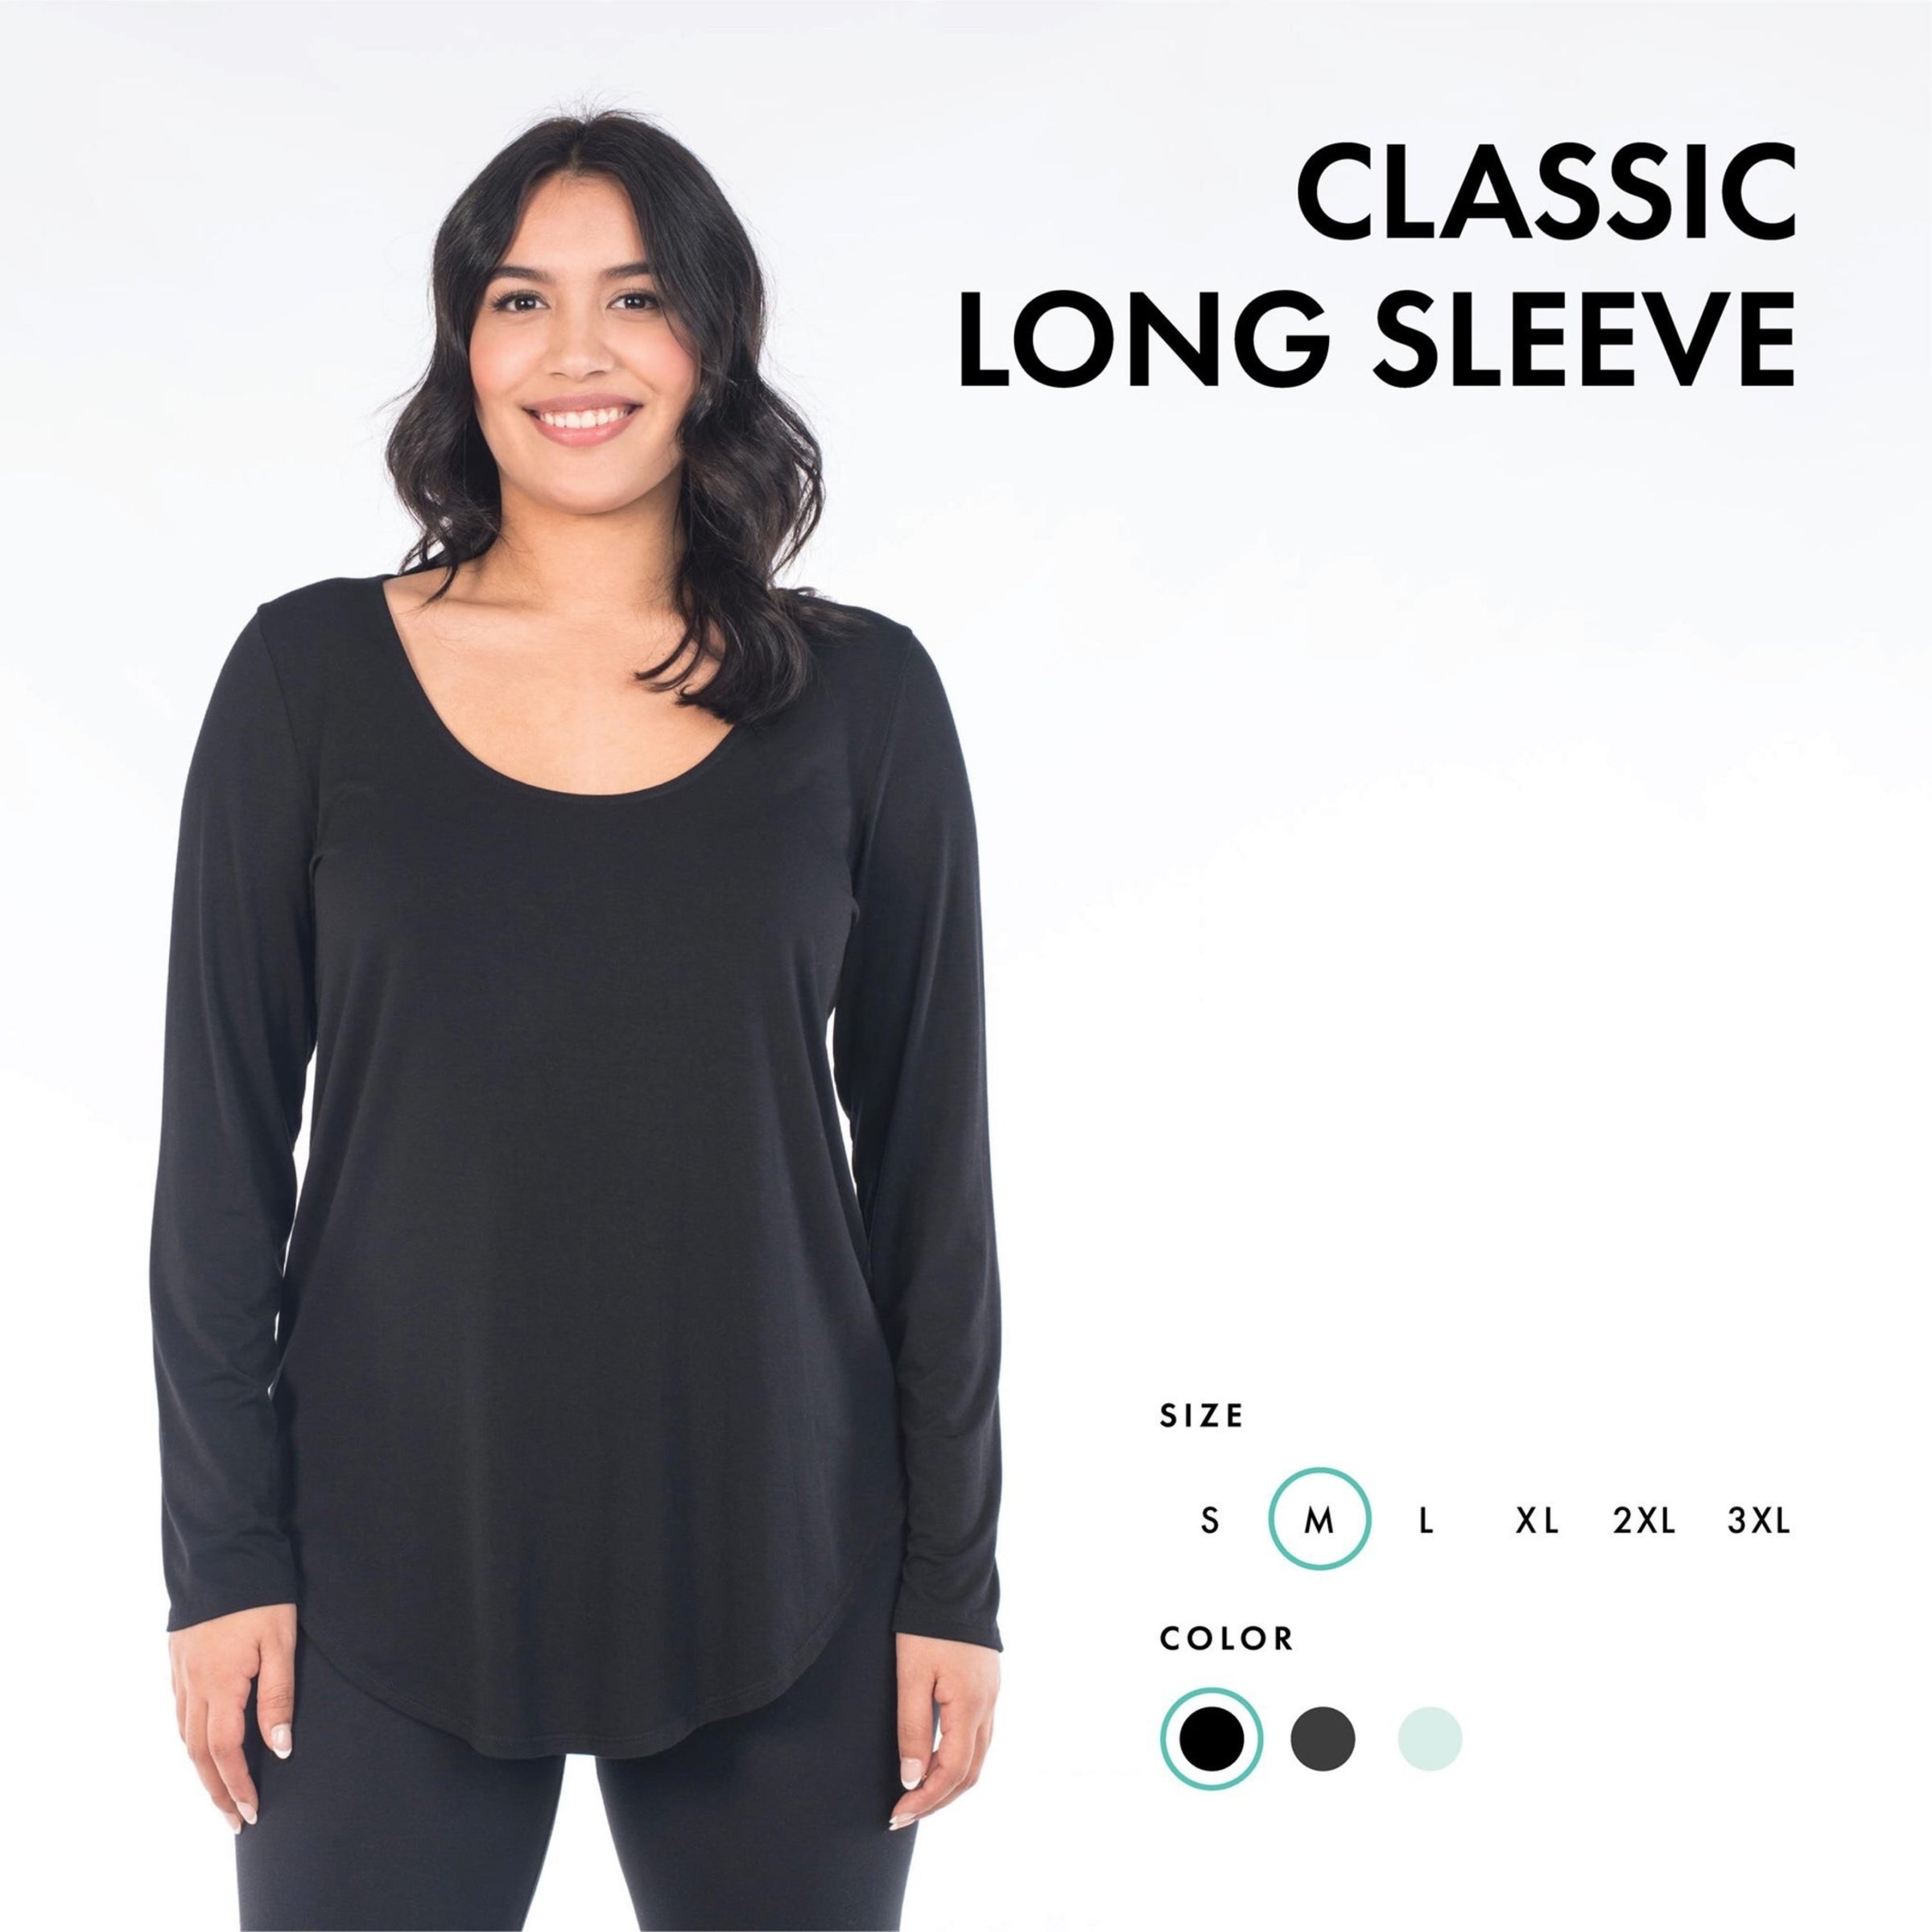 Classic Long Sleeve (Relaxed Fit) - Black